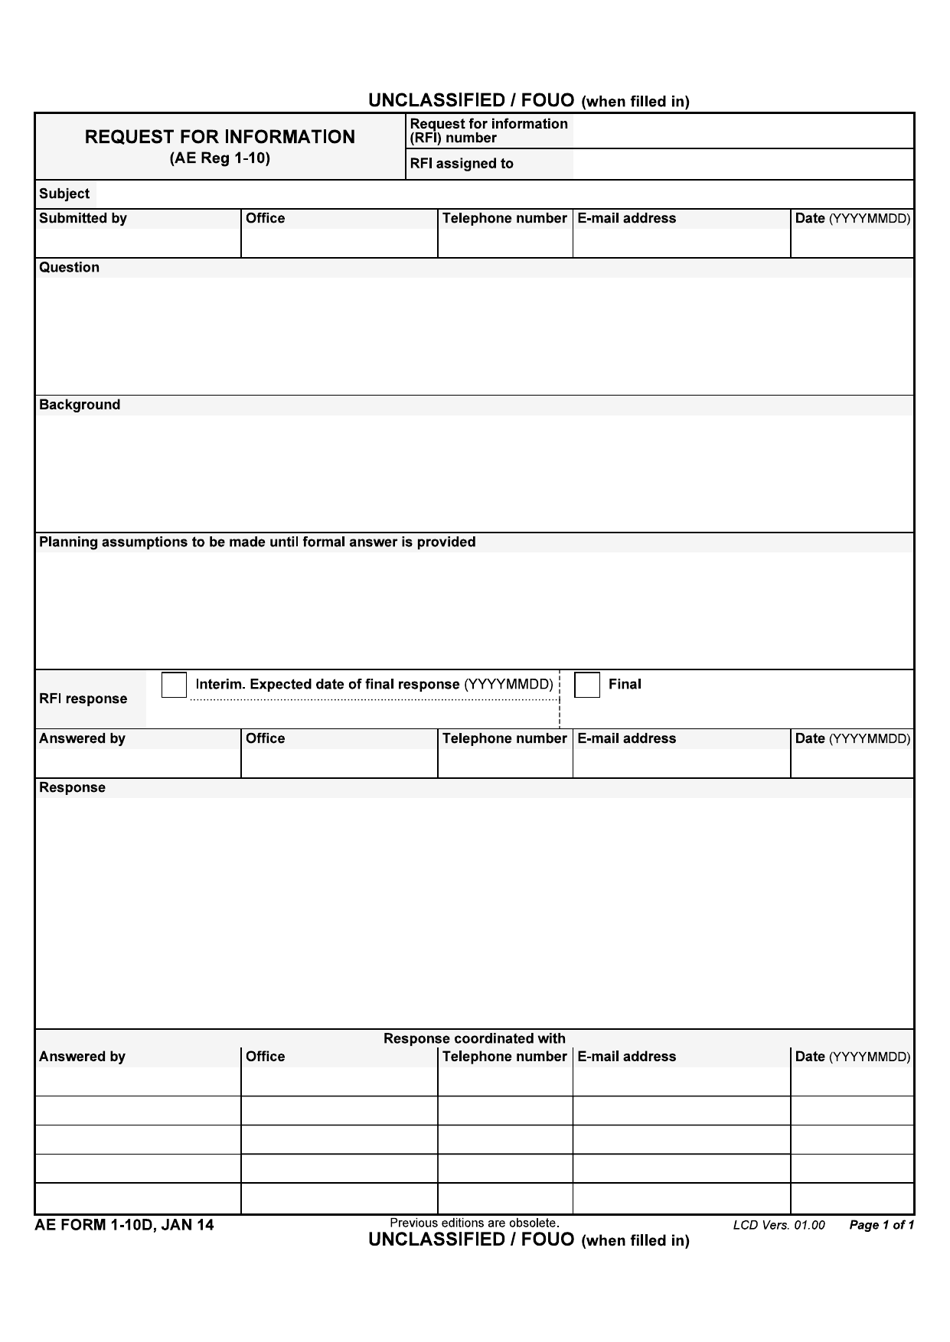 AE Form 1-10D Request for Information, Page 1